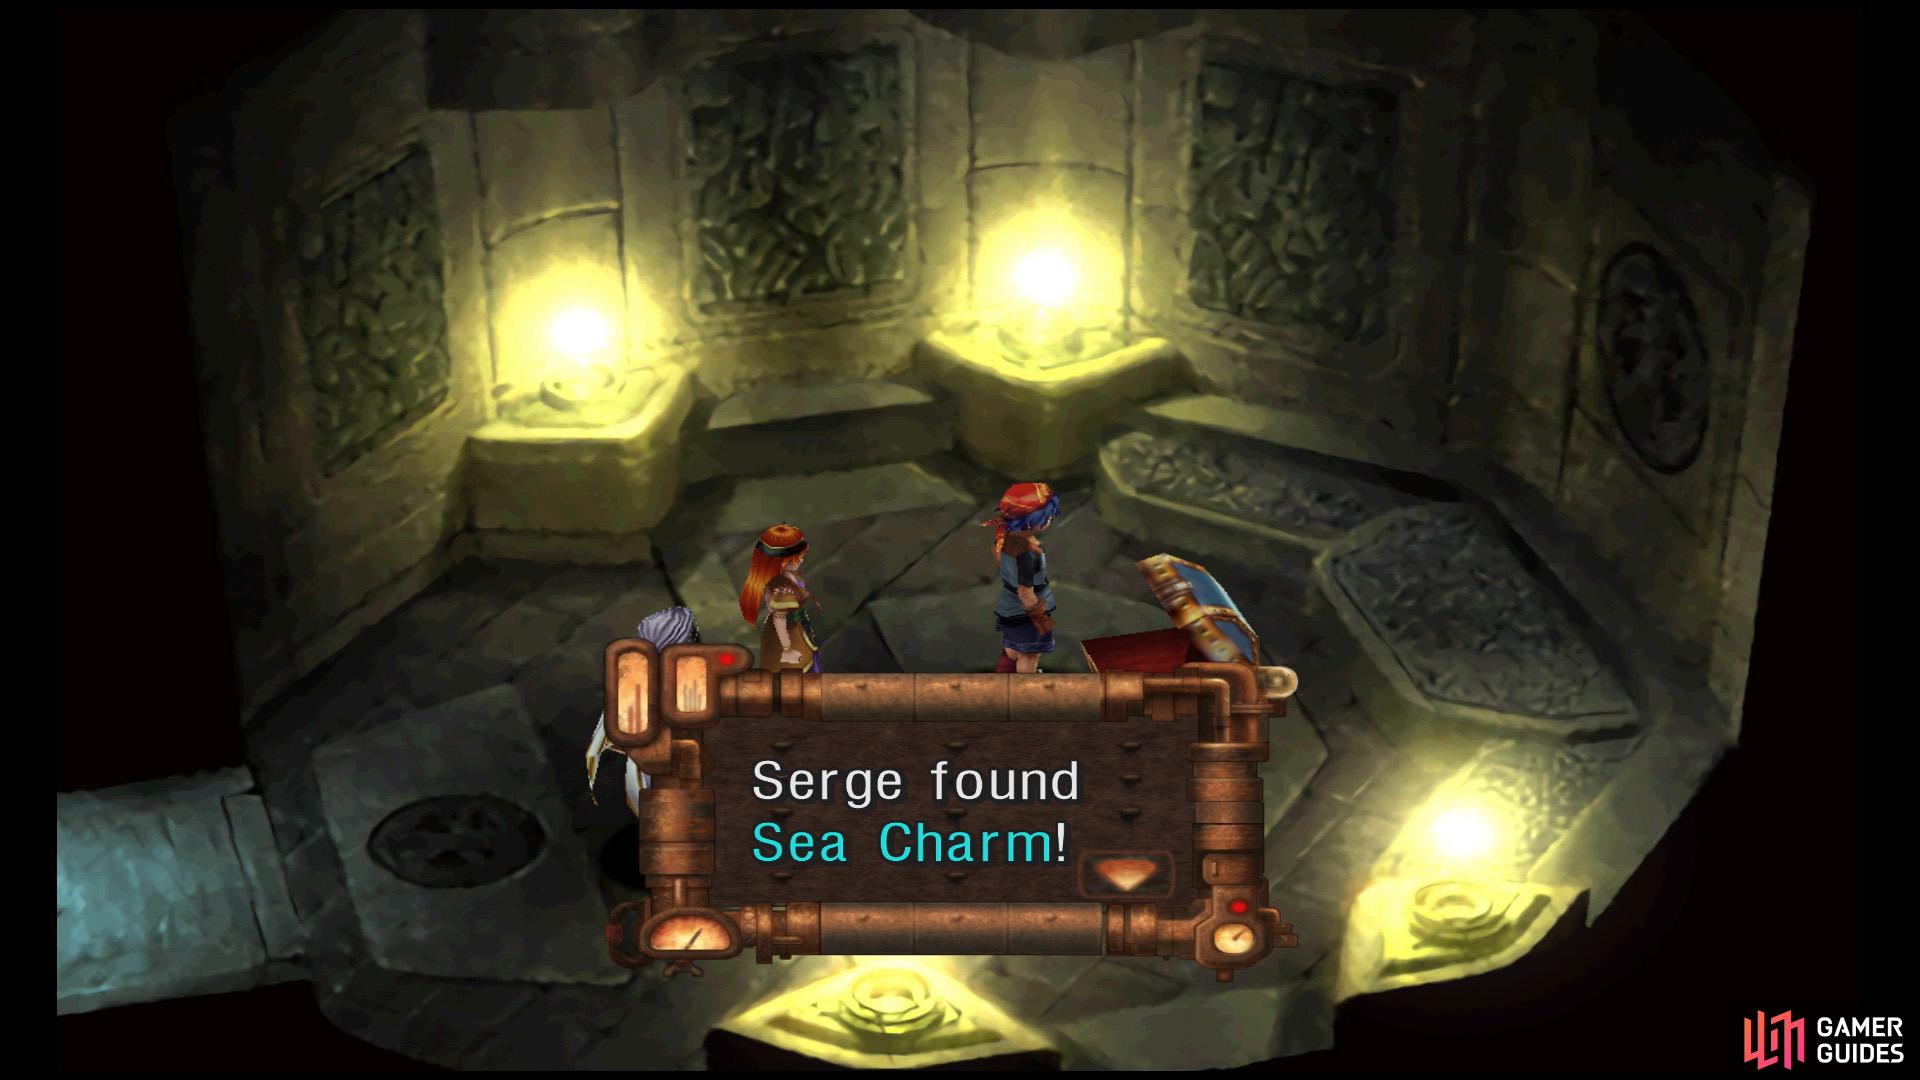 Meanwhile, the opposite doorway leads to a Sea Charm.